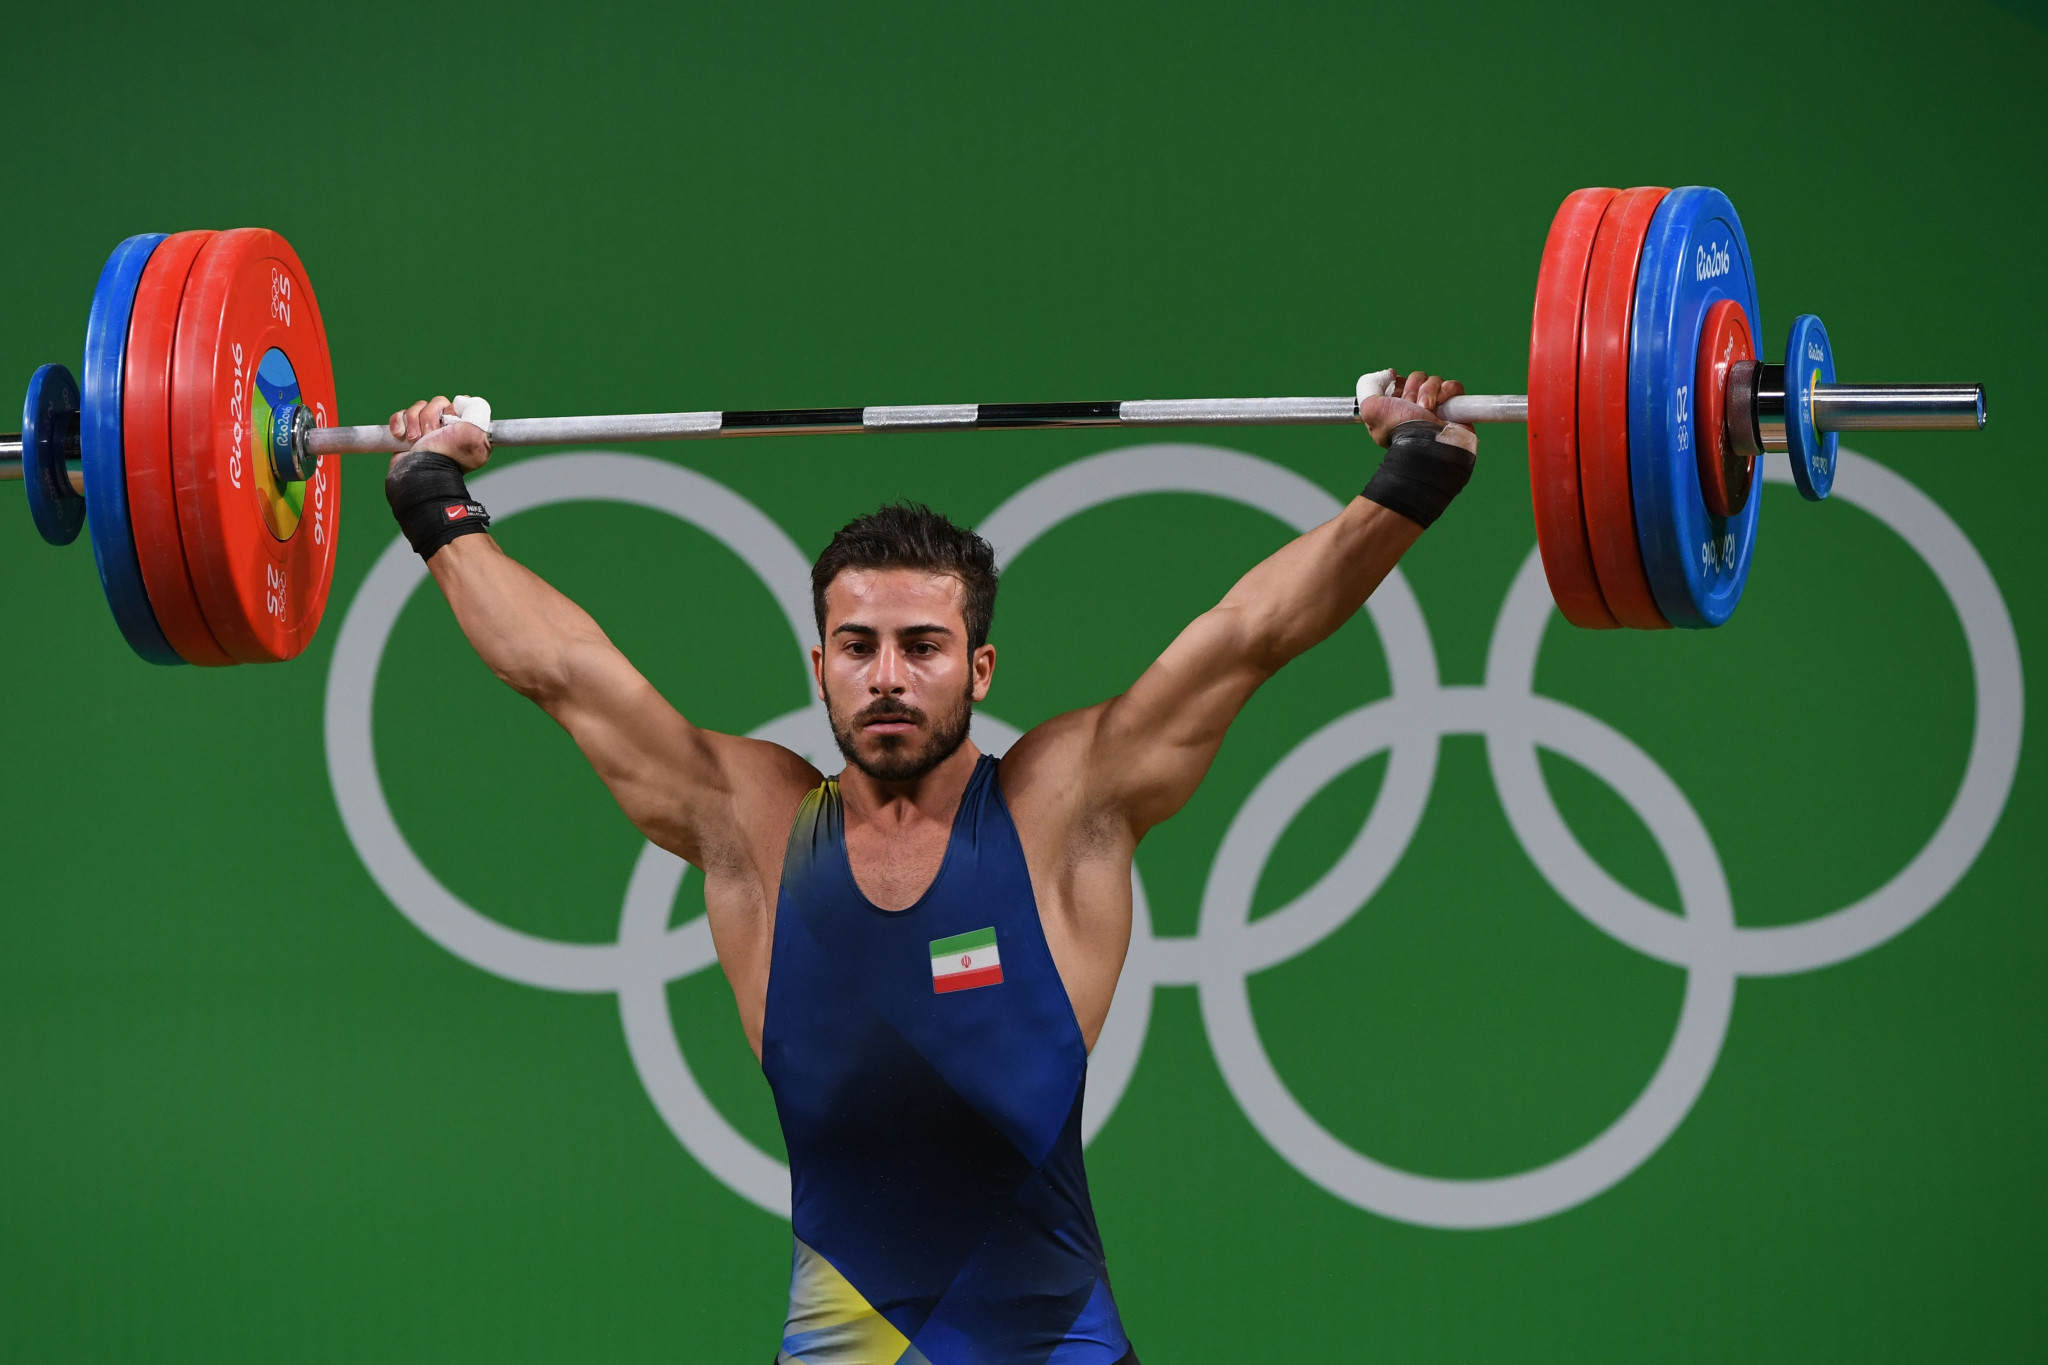 Reigning Olympic champion Kianoush Rostami will lead Iran's charge for medals ©Getty Images